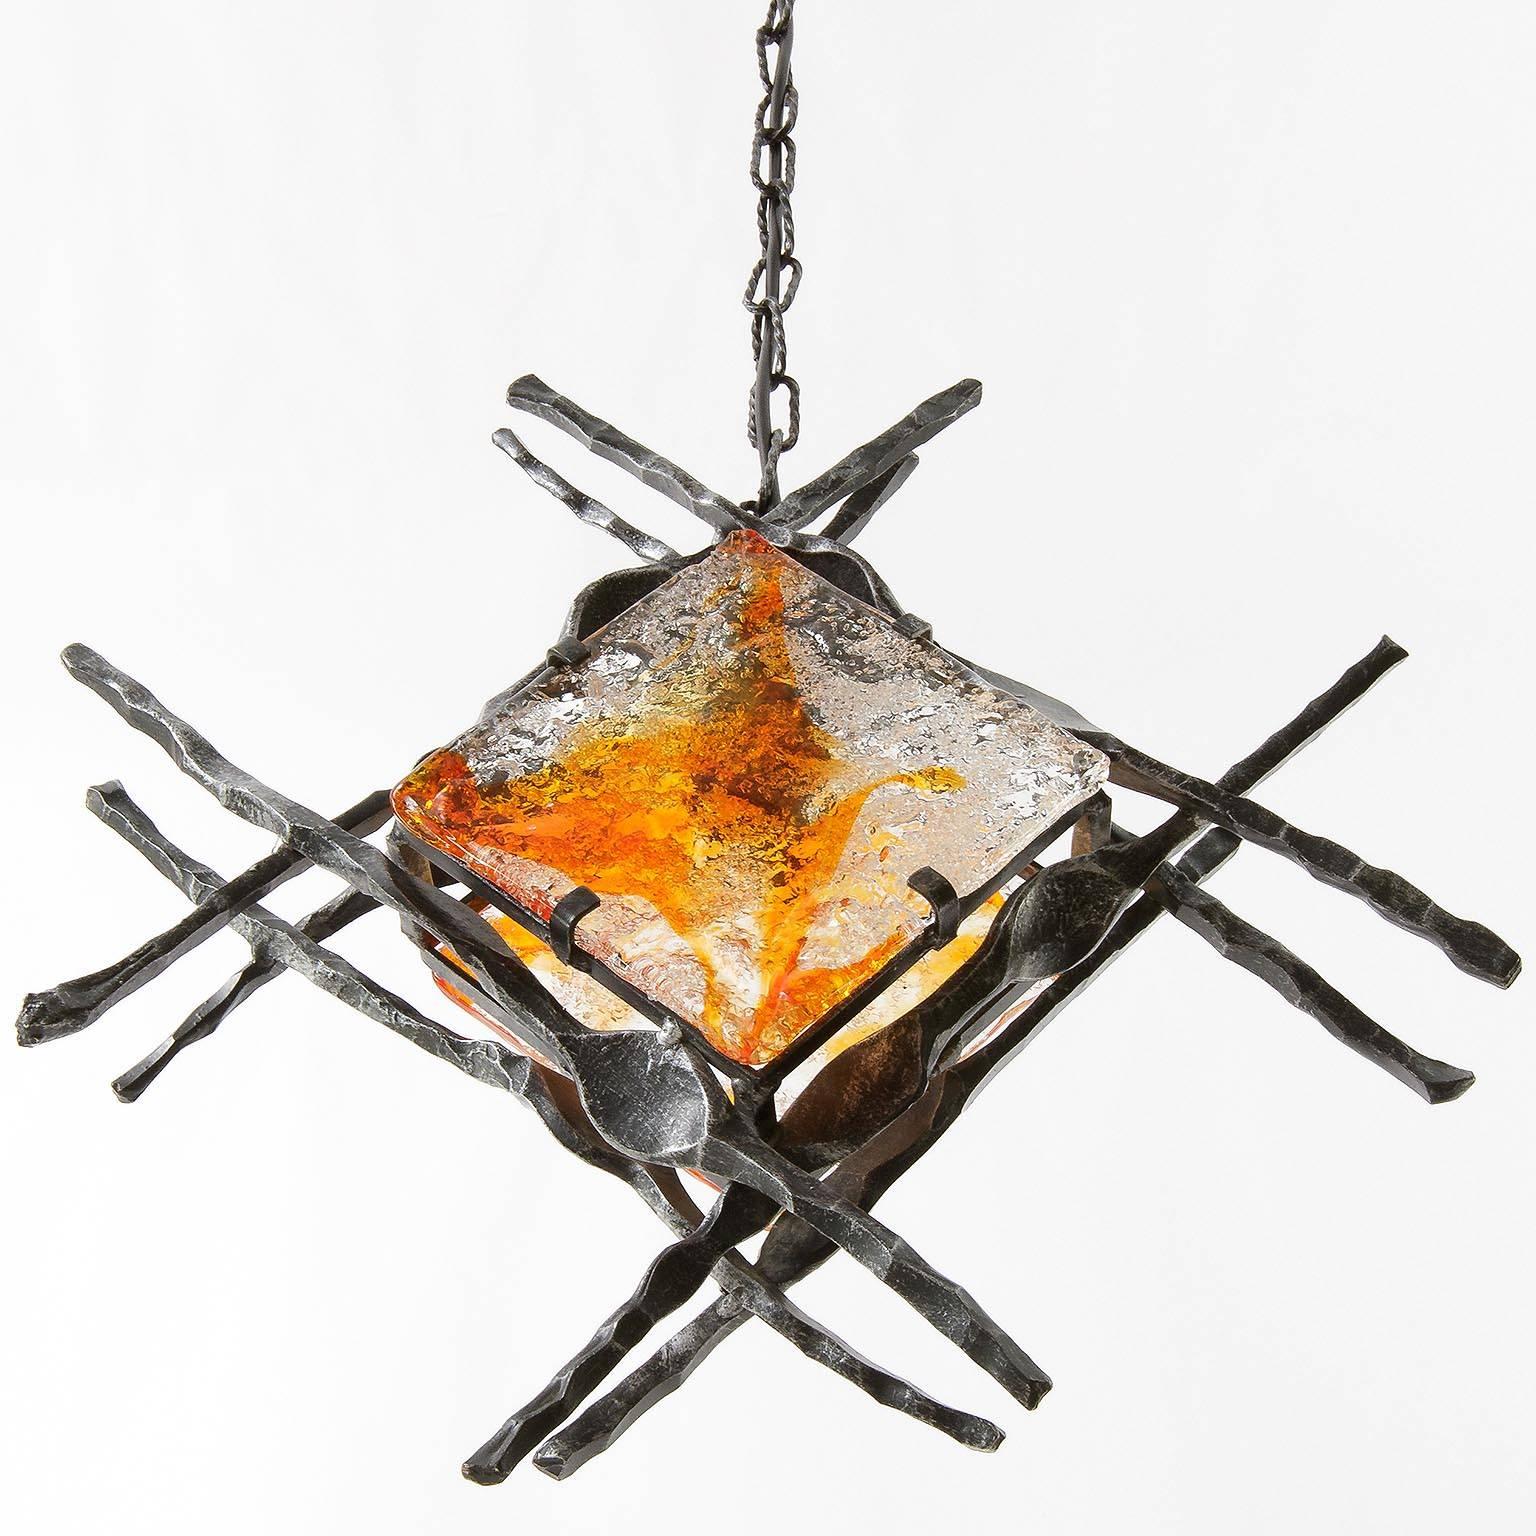 A Brutalist style handmade iron and glass light fixture, manufactured in Mid-Century, circa 1970. 
This modernist lamp is made of wrought iron and two handblown orange / amber tone glasses.
It can be used as pendant or wall light. The light has one